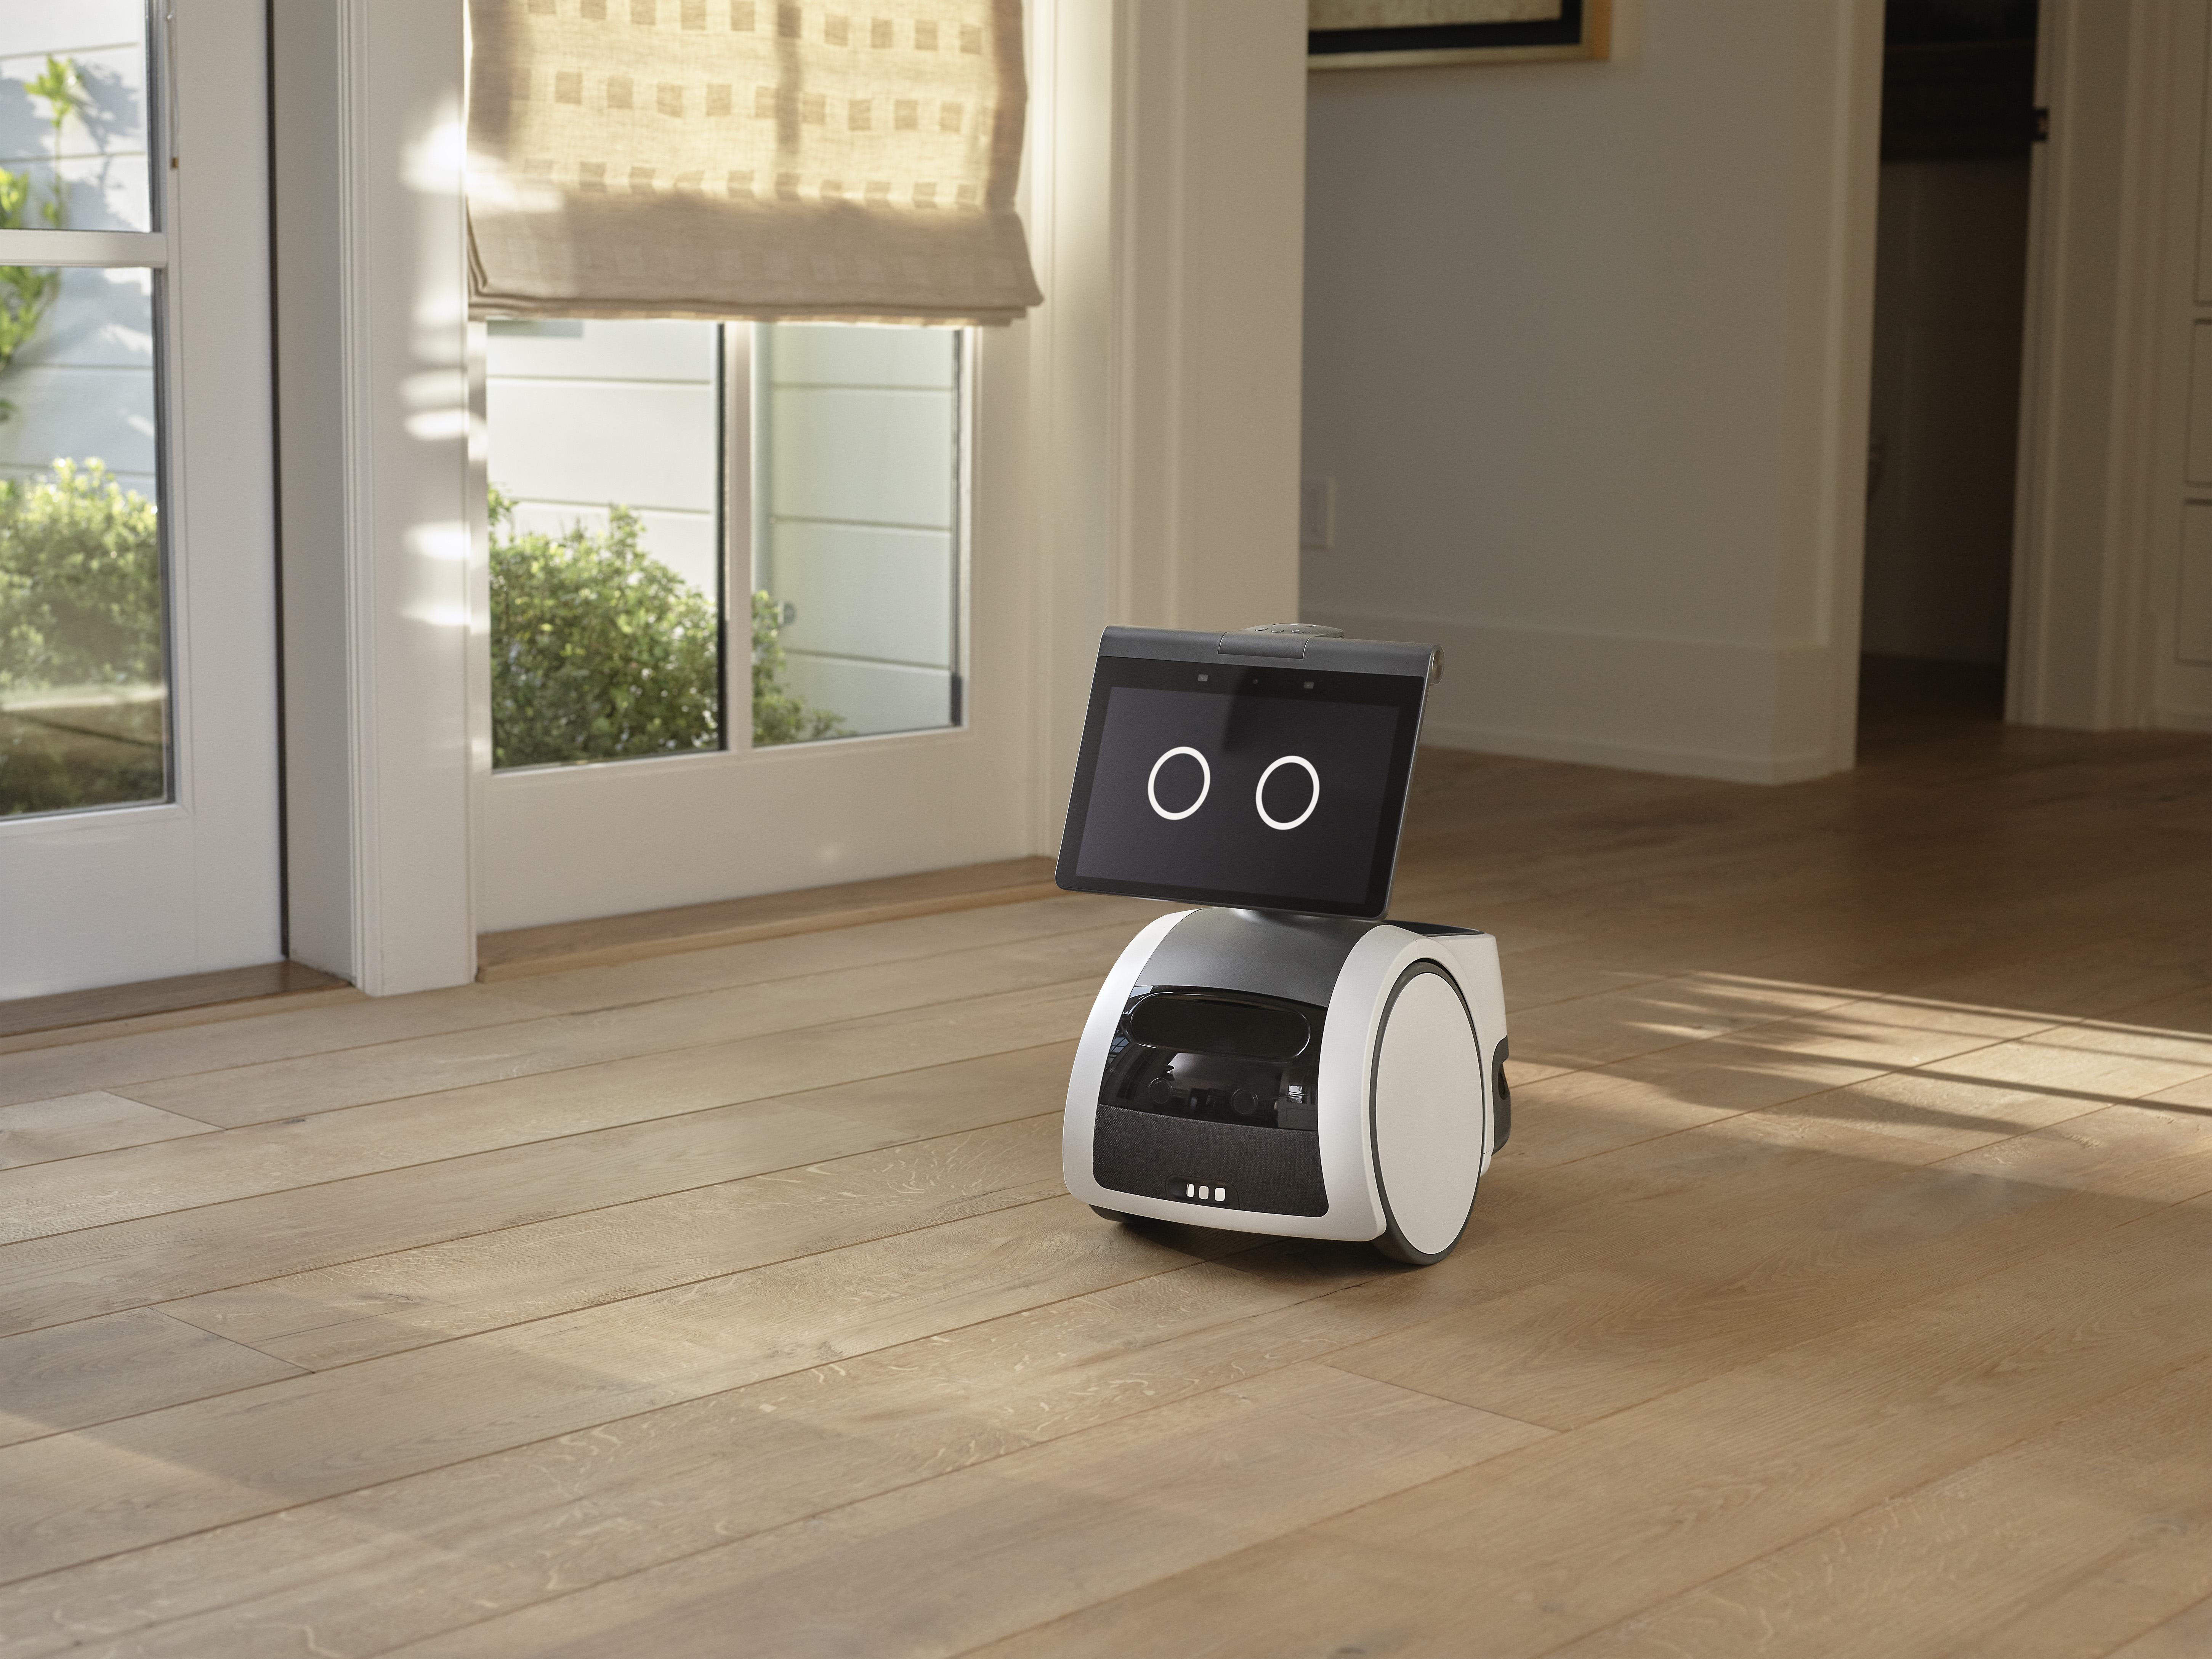 Astro: Amazon brings robots for the home with Alexa thumbnail